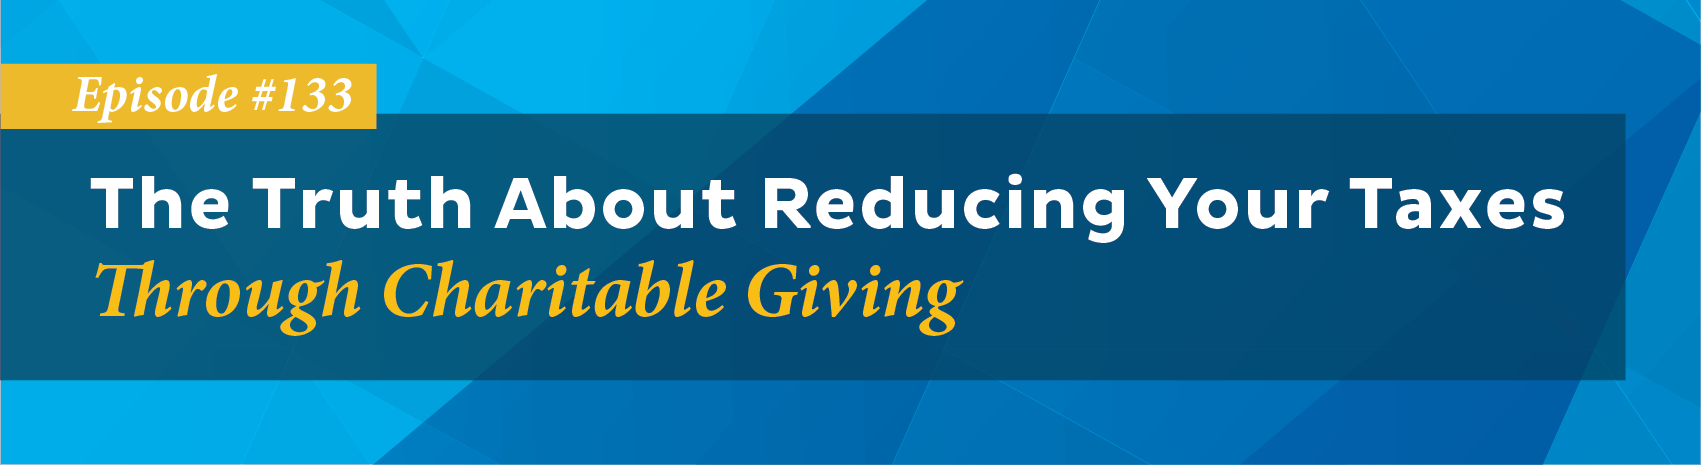 The Truth About Reducing Your Taxes Through Charitable Giving